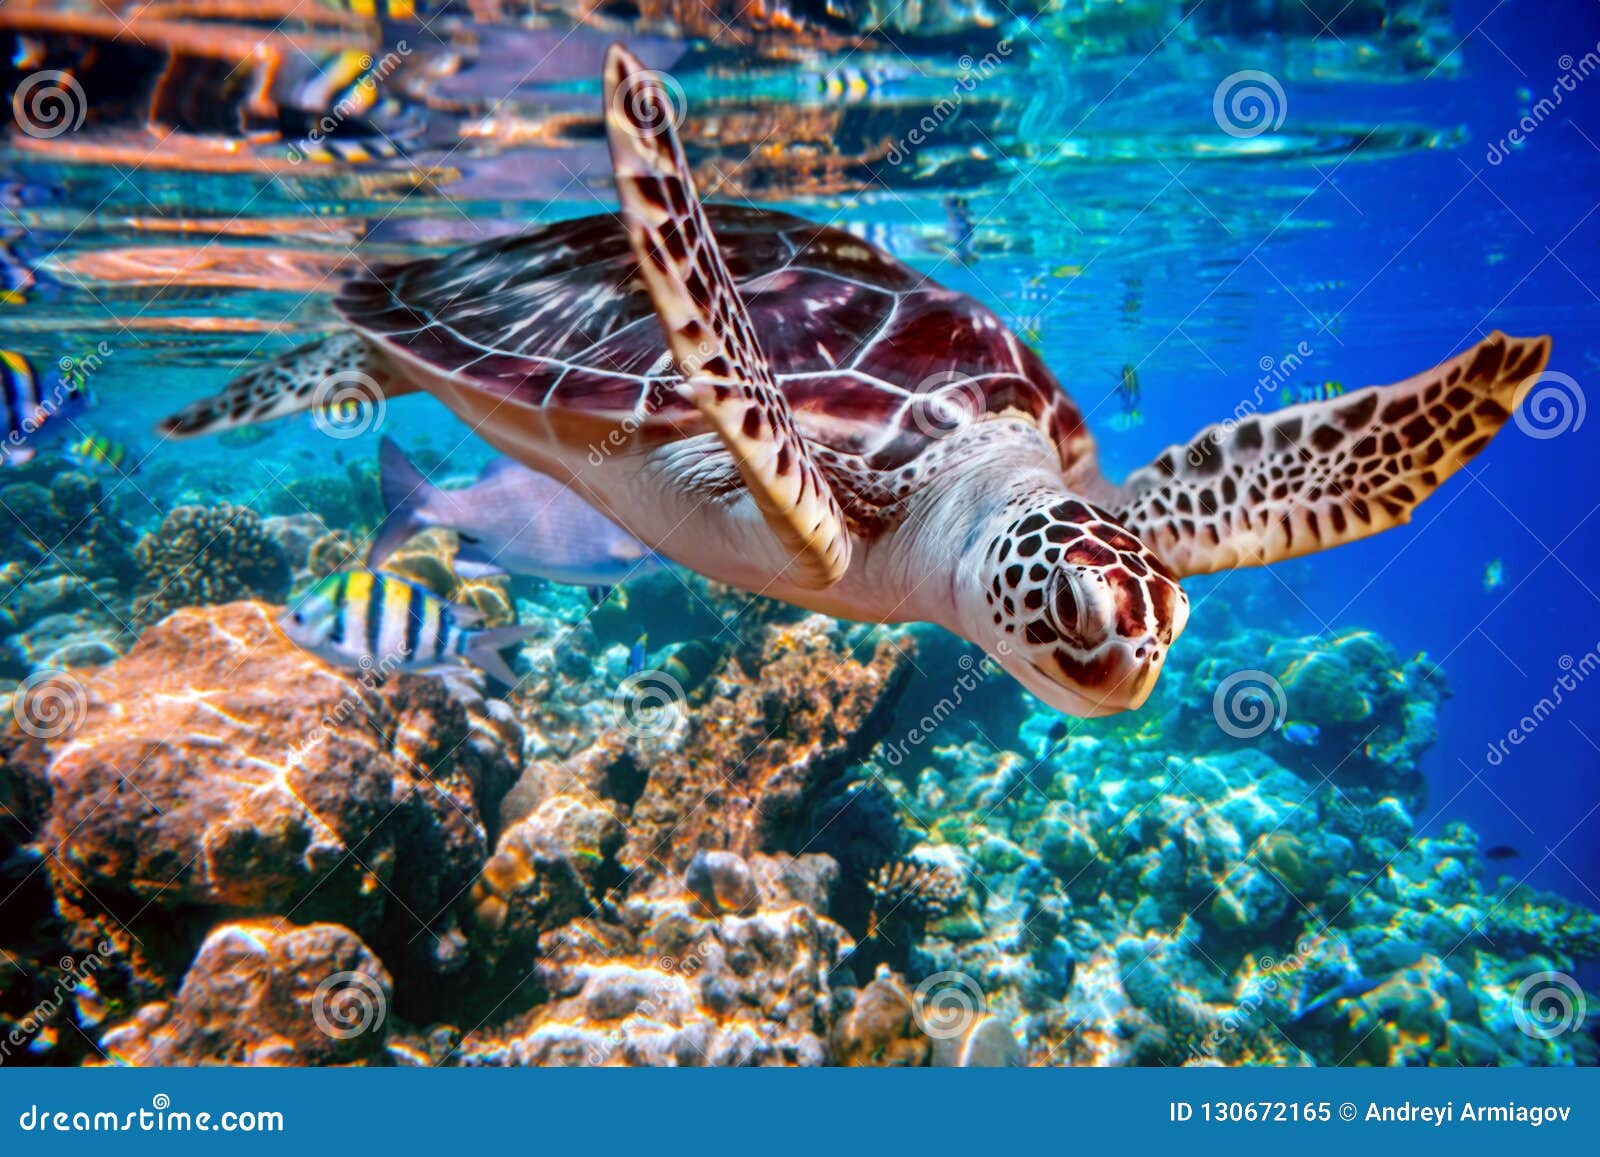 sea turtle swims under water on the background of coral reefs